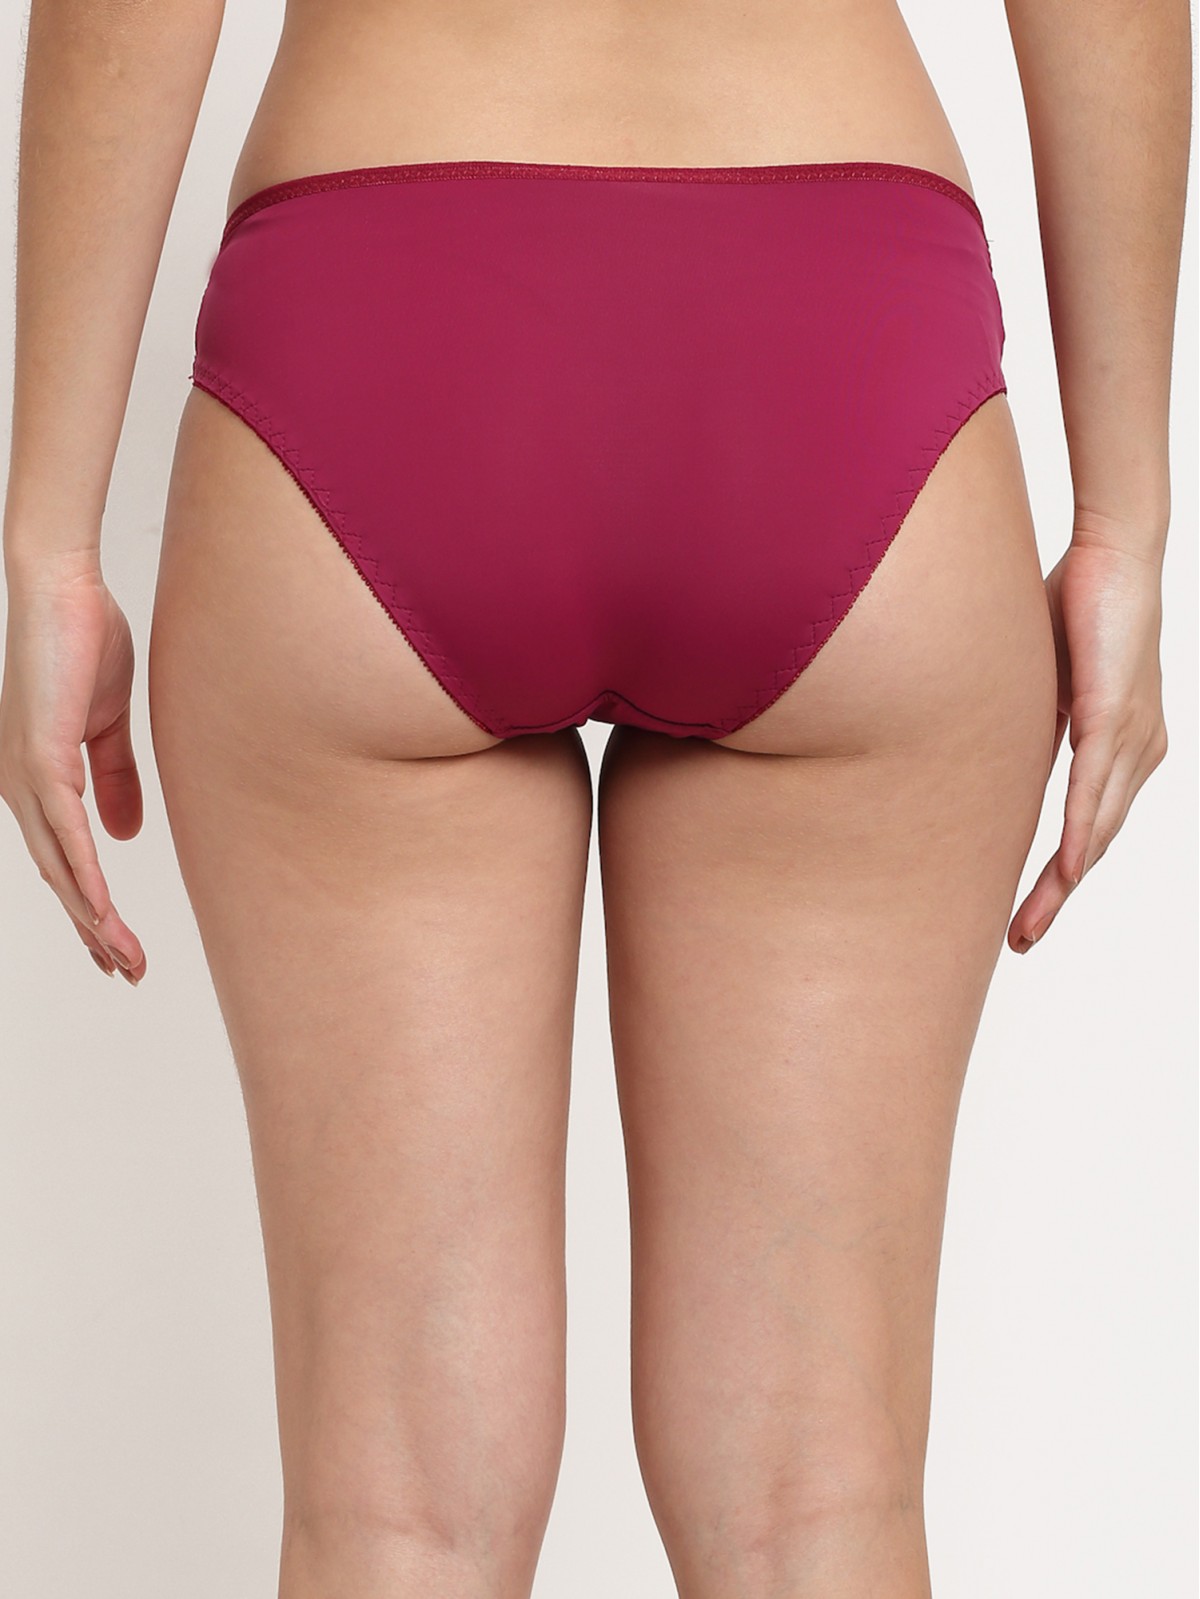 The Fore Front Invitational Panty K1506P